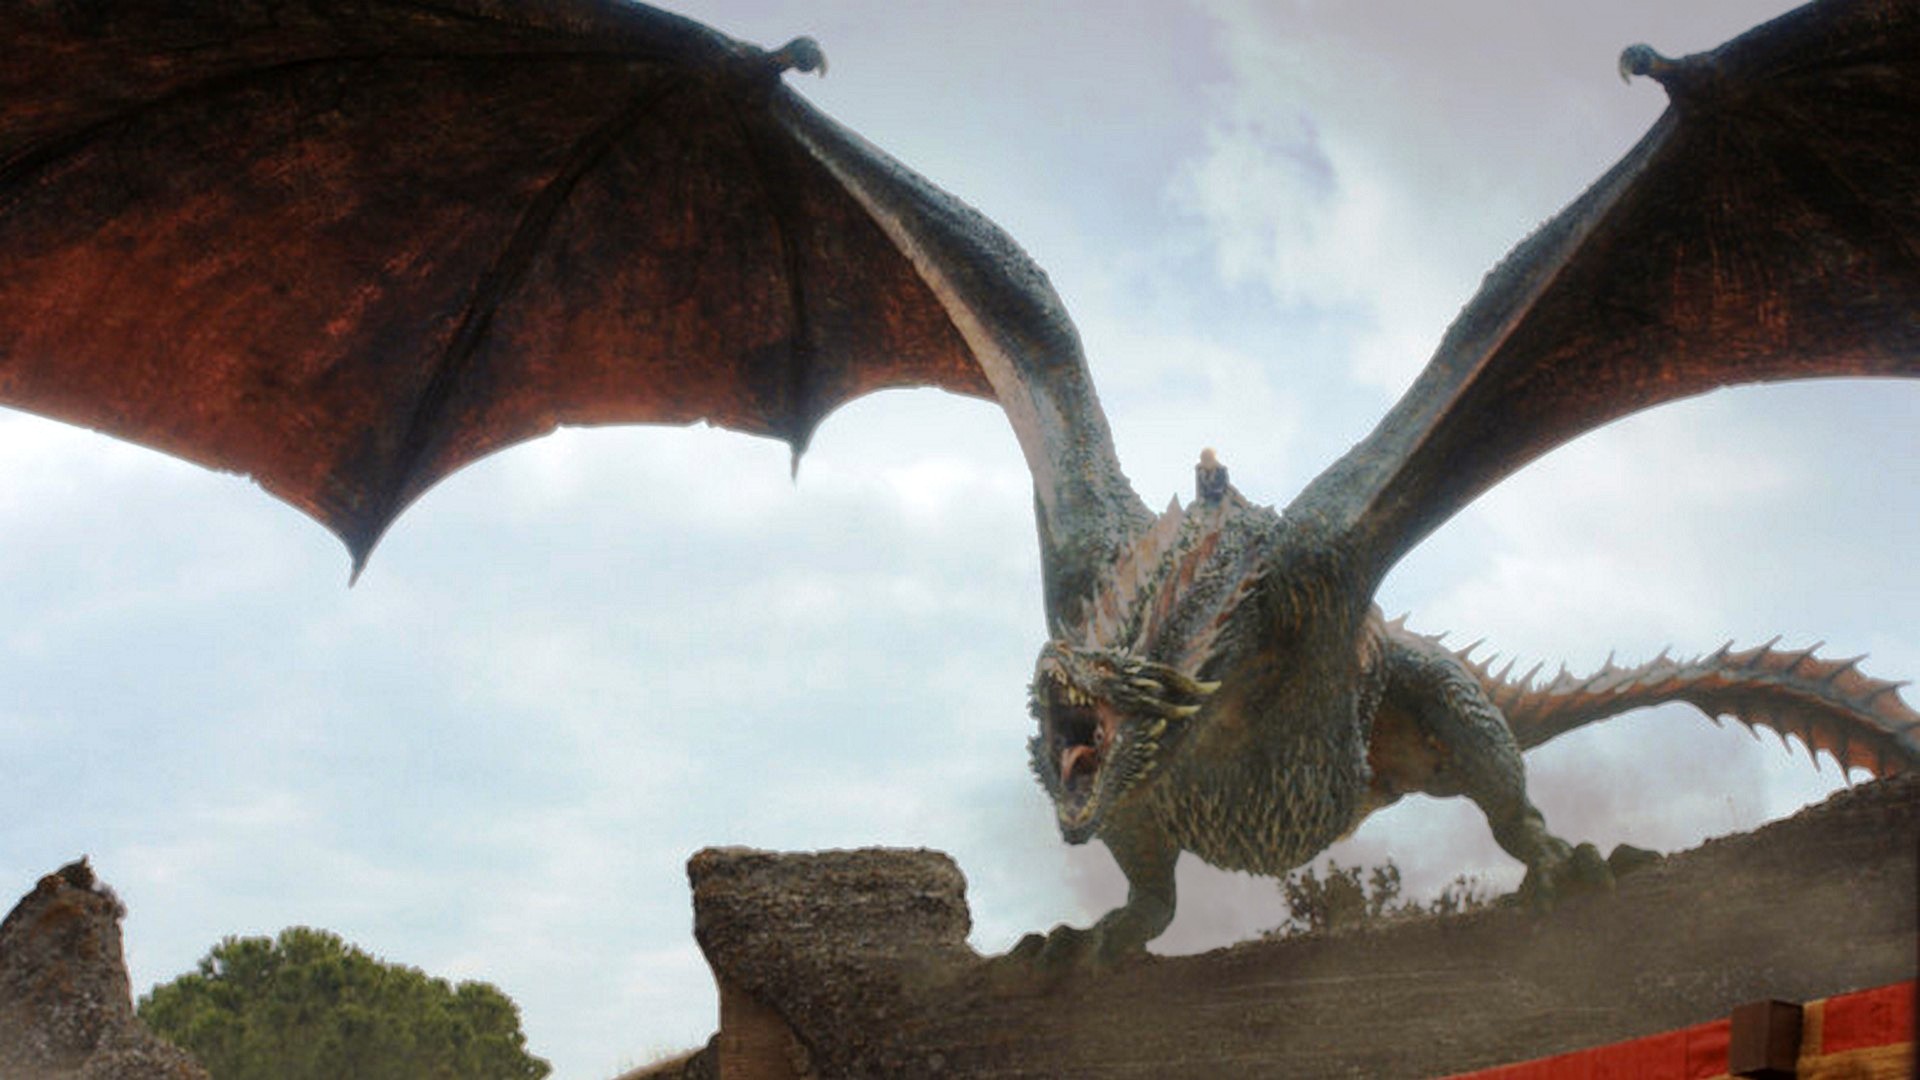 Game of Thrones Dragons Wallpaper HD With high-resolution 1920X1080 pixel. You can use this poster wallpaper for your Desktop Computers, Mac Screensavers, Windows Backgrounds, iPhone Wallpapers, Tablet or Android Lock screen and another Mobile device